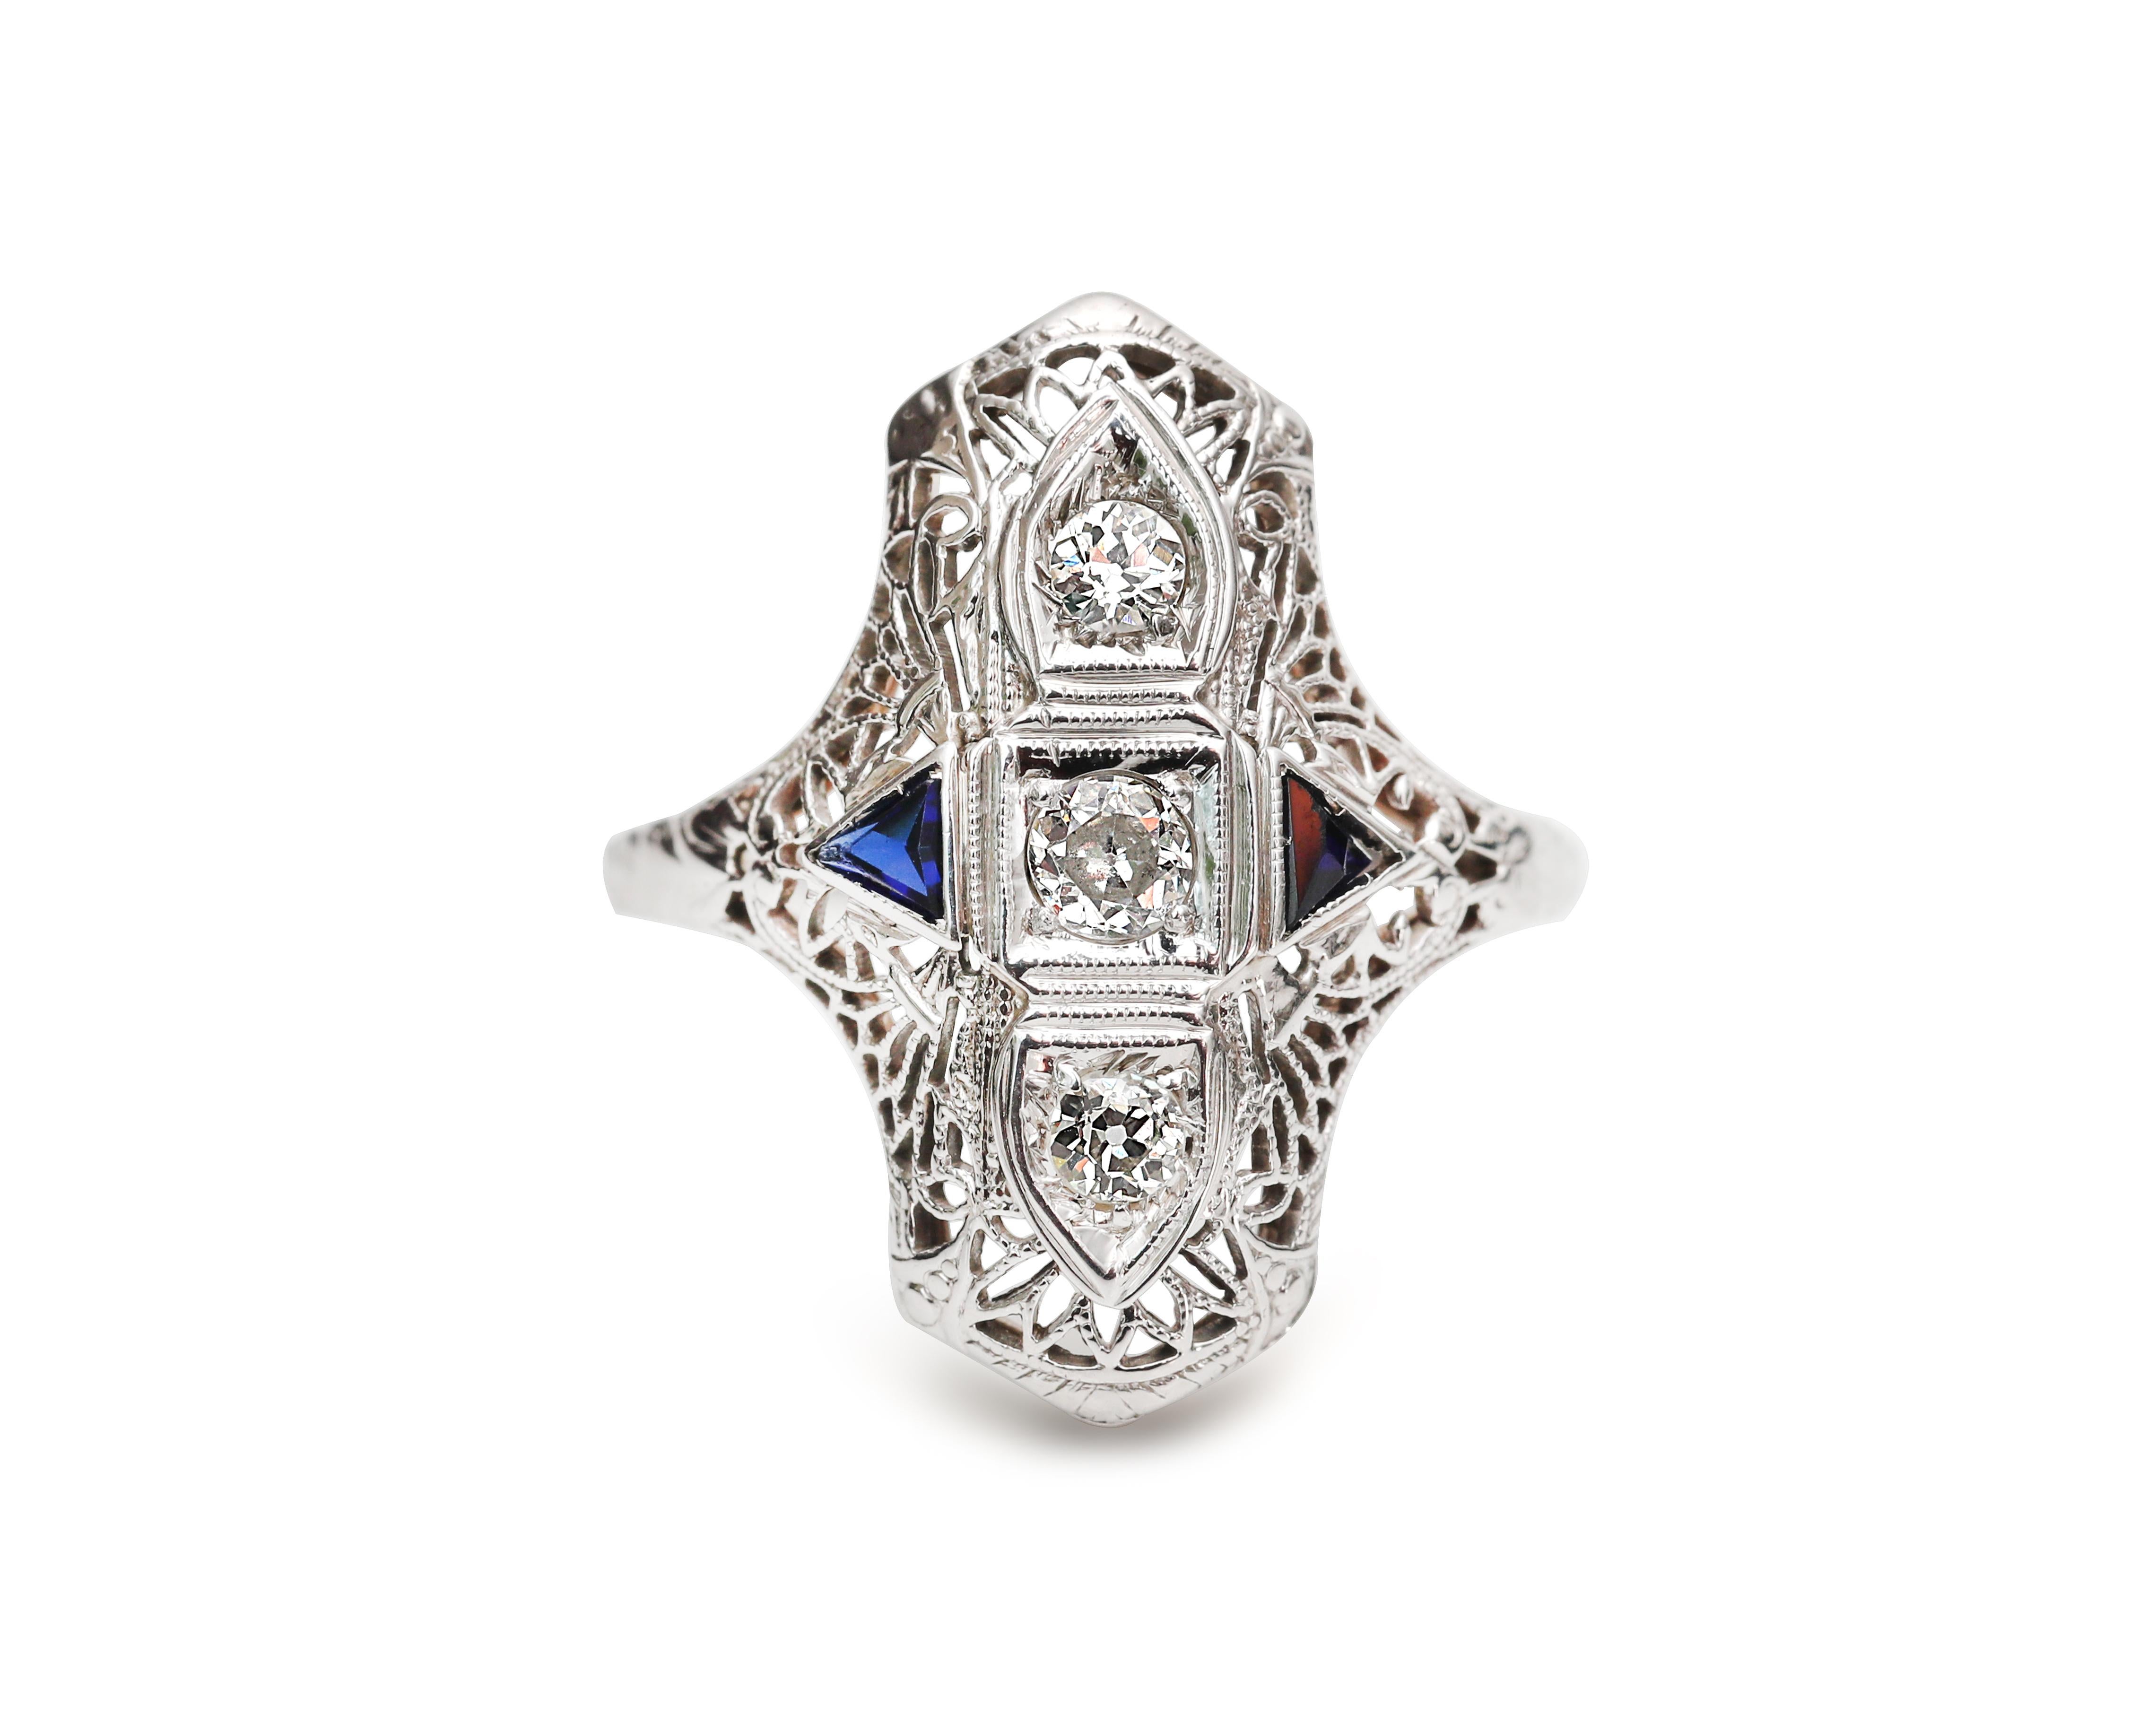 Women's Vintage Art Deco Shield Cocktail Ring 14 Karat Gold with Diamond and Sapphire